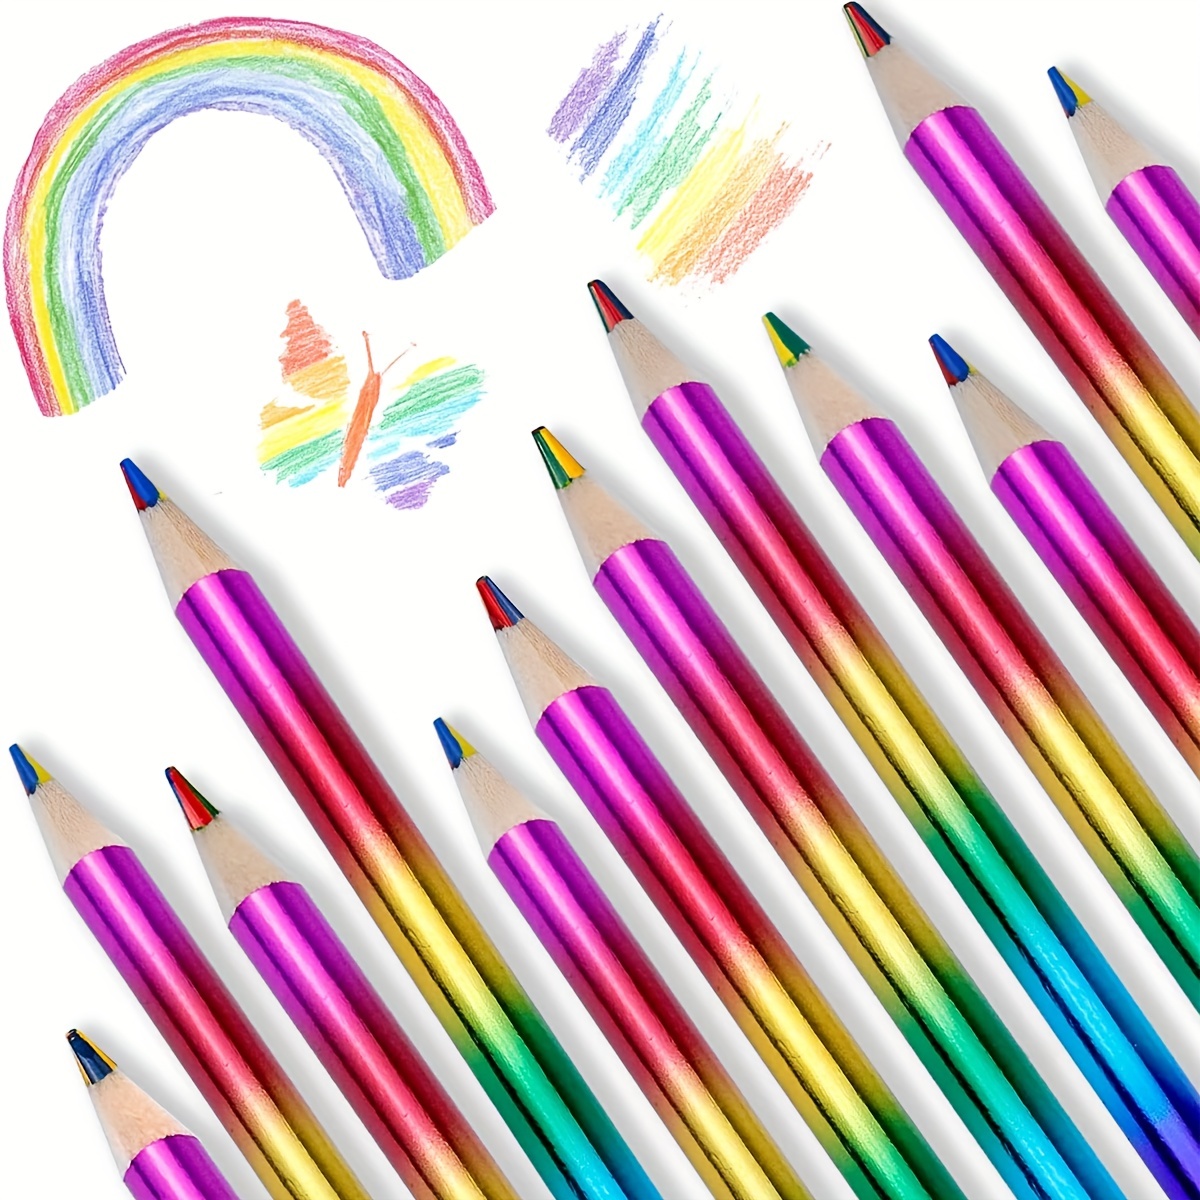 7 in 1 Rainbow Colored Pencils, Jumbo Color Pencils for Kids & Adults,  Multicolored Pencils, Drawing Pencils for Sketching & Coloring, Rainbow  Pencils